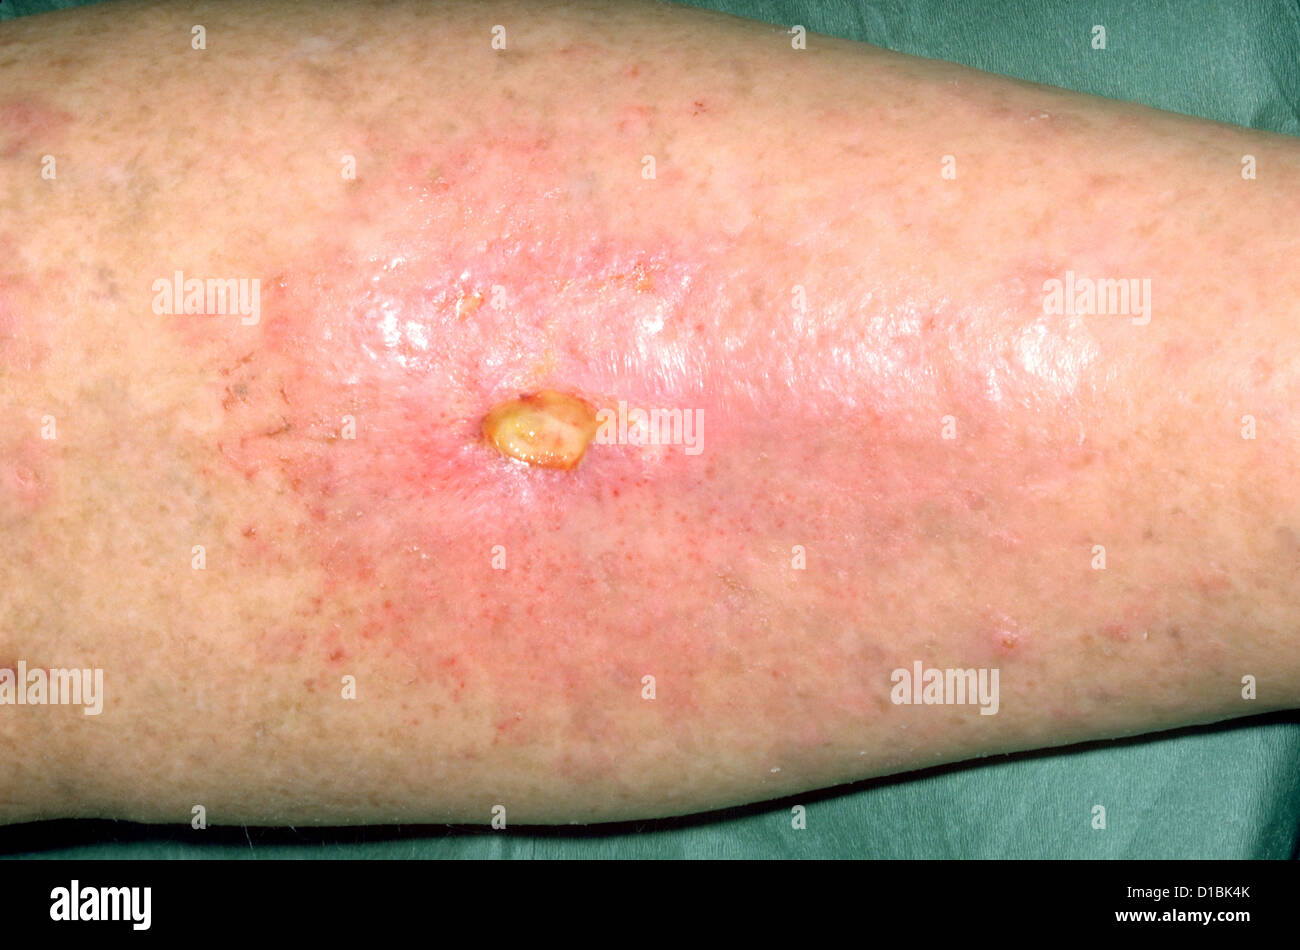 RADIOTHERAPY ULCER ON LEG Stock Photo